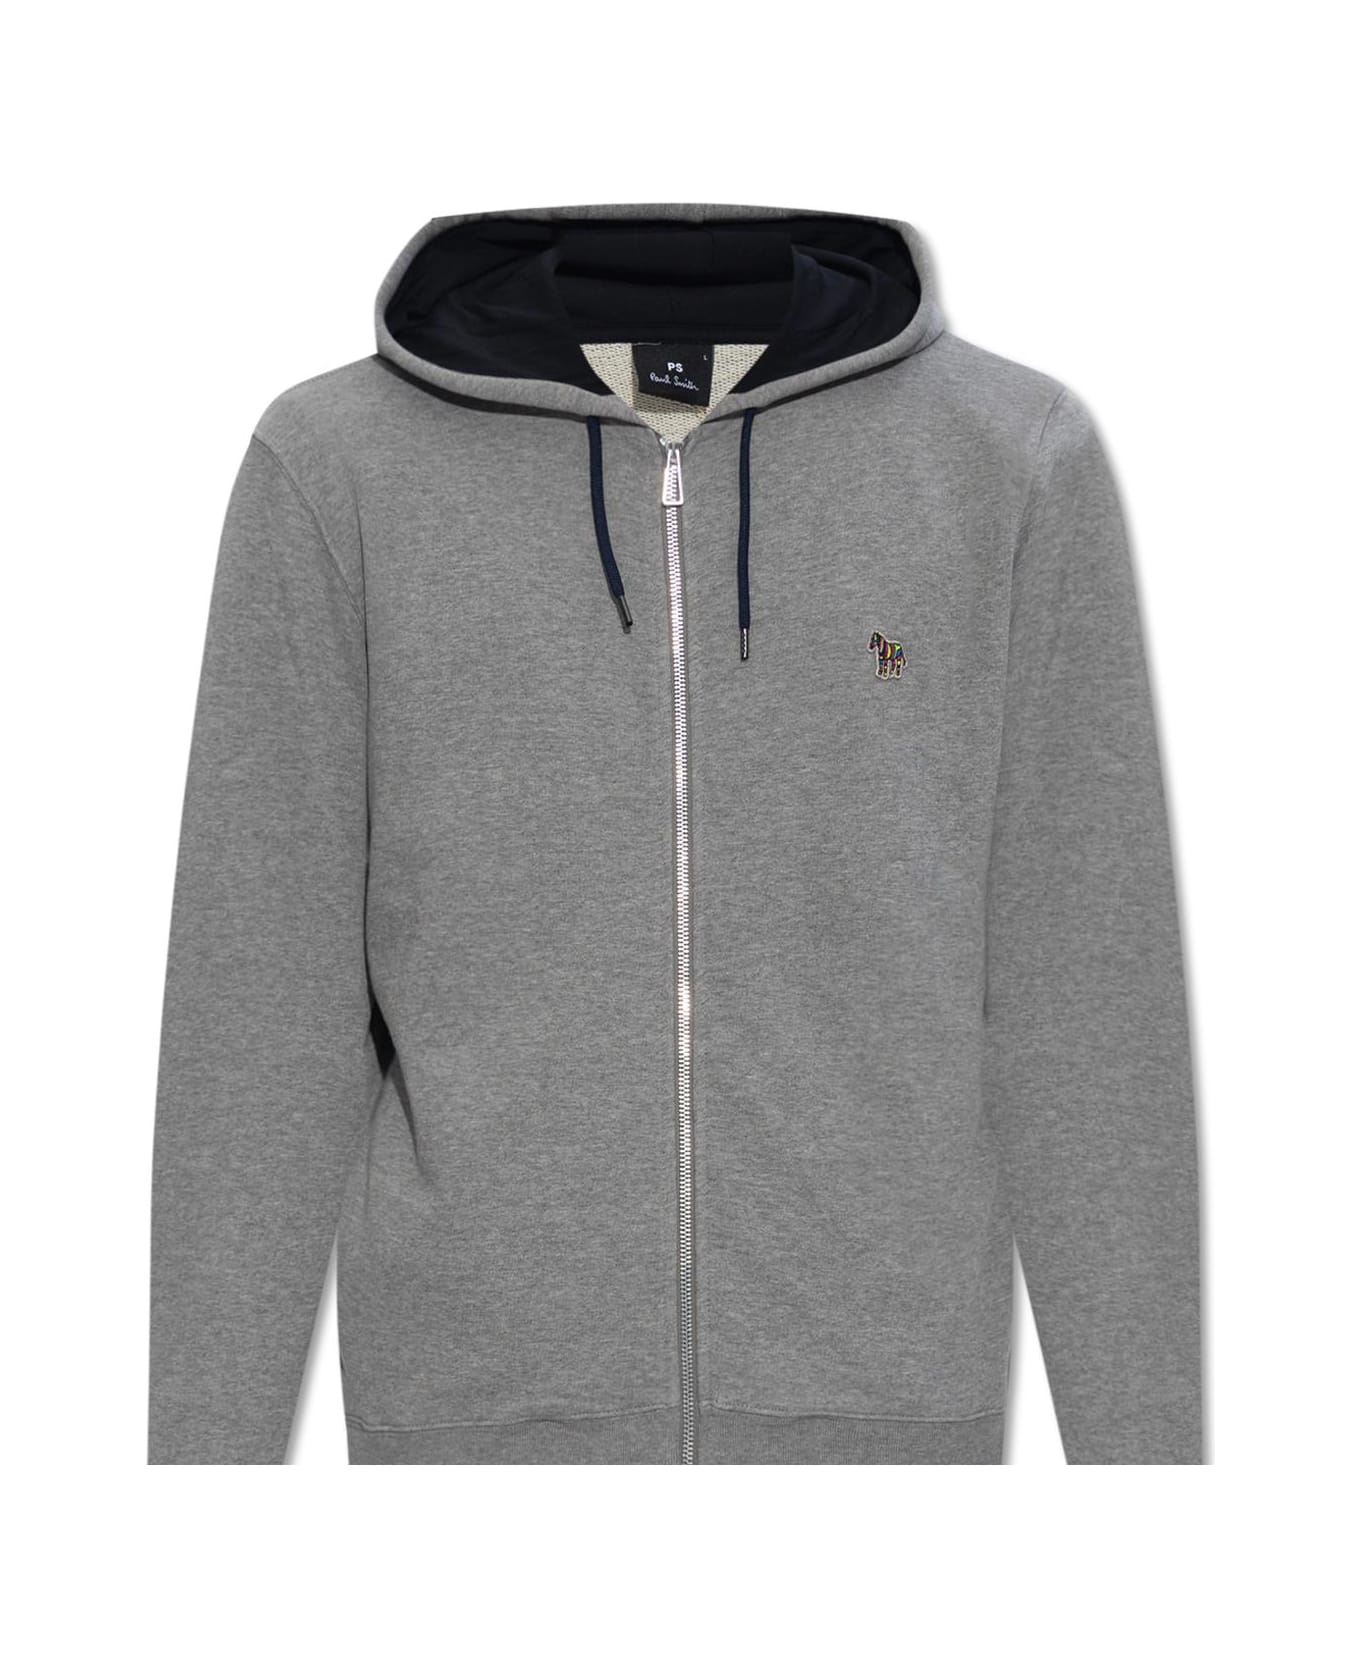 PS by Paul Smith Ps Paul Smith Patched Hoodie - Grey